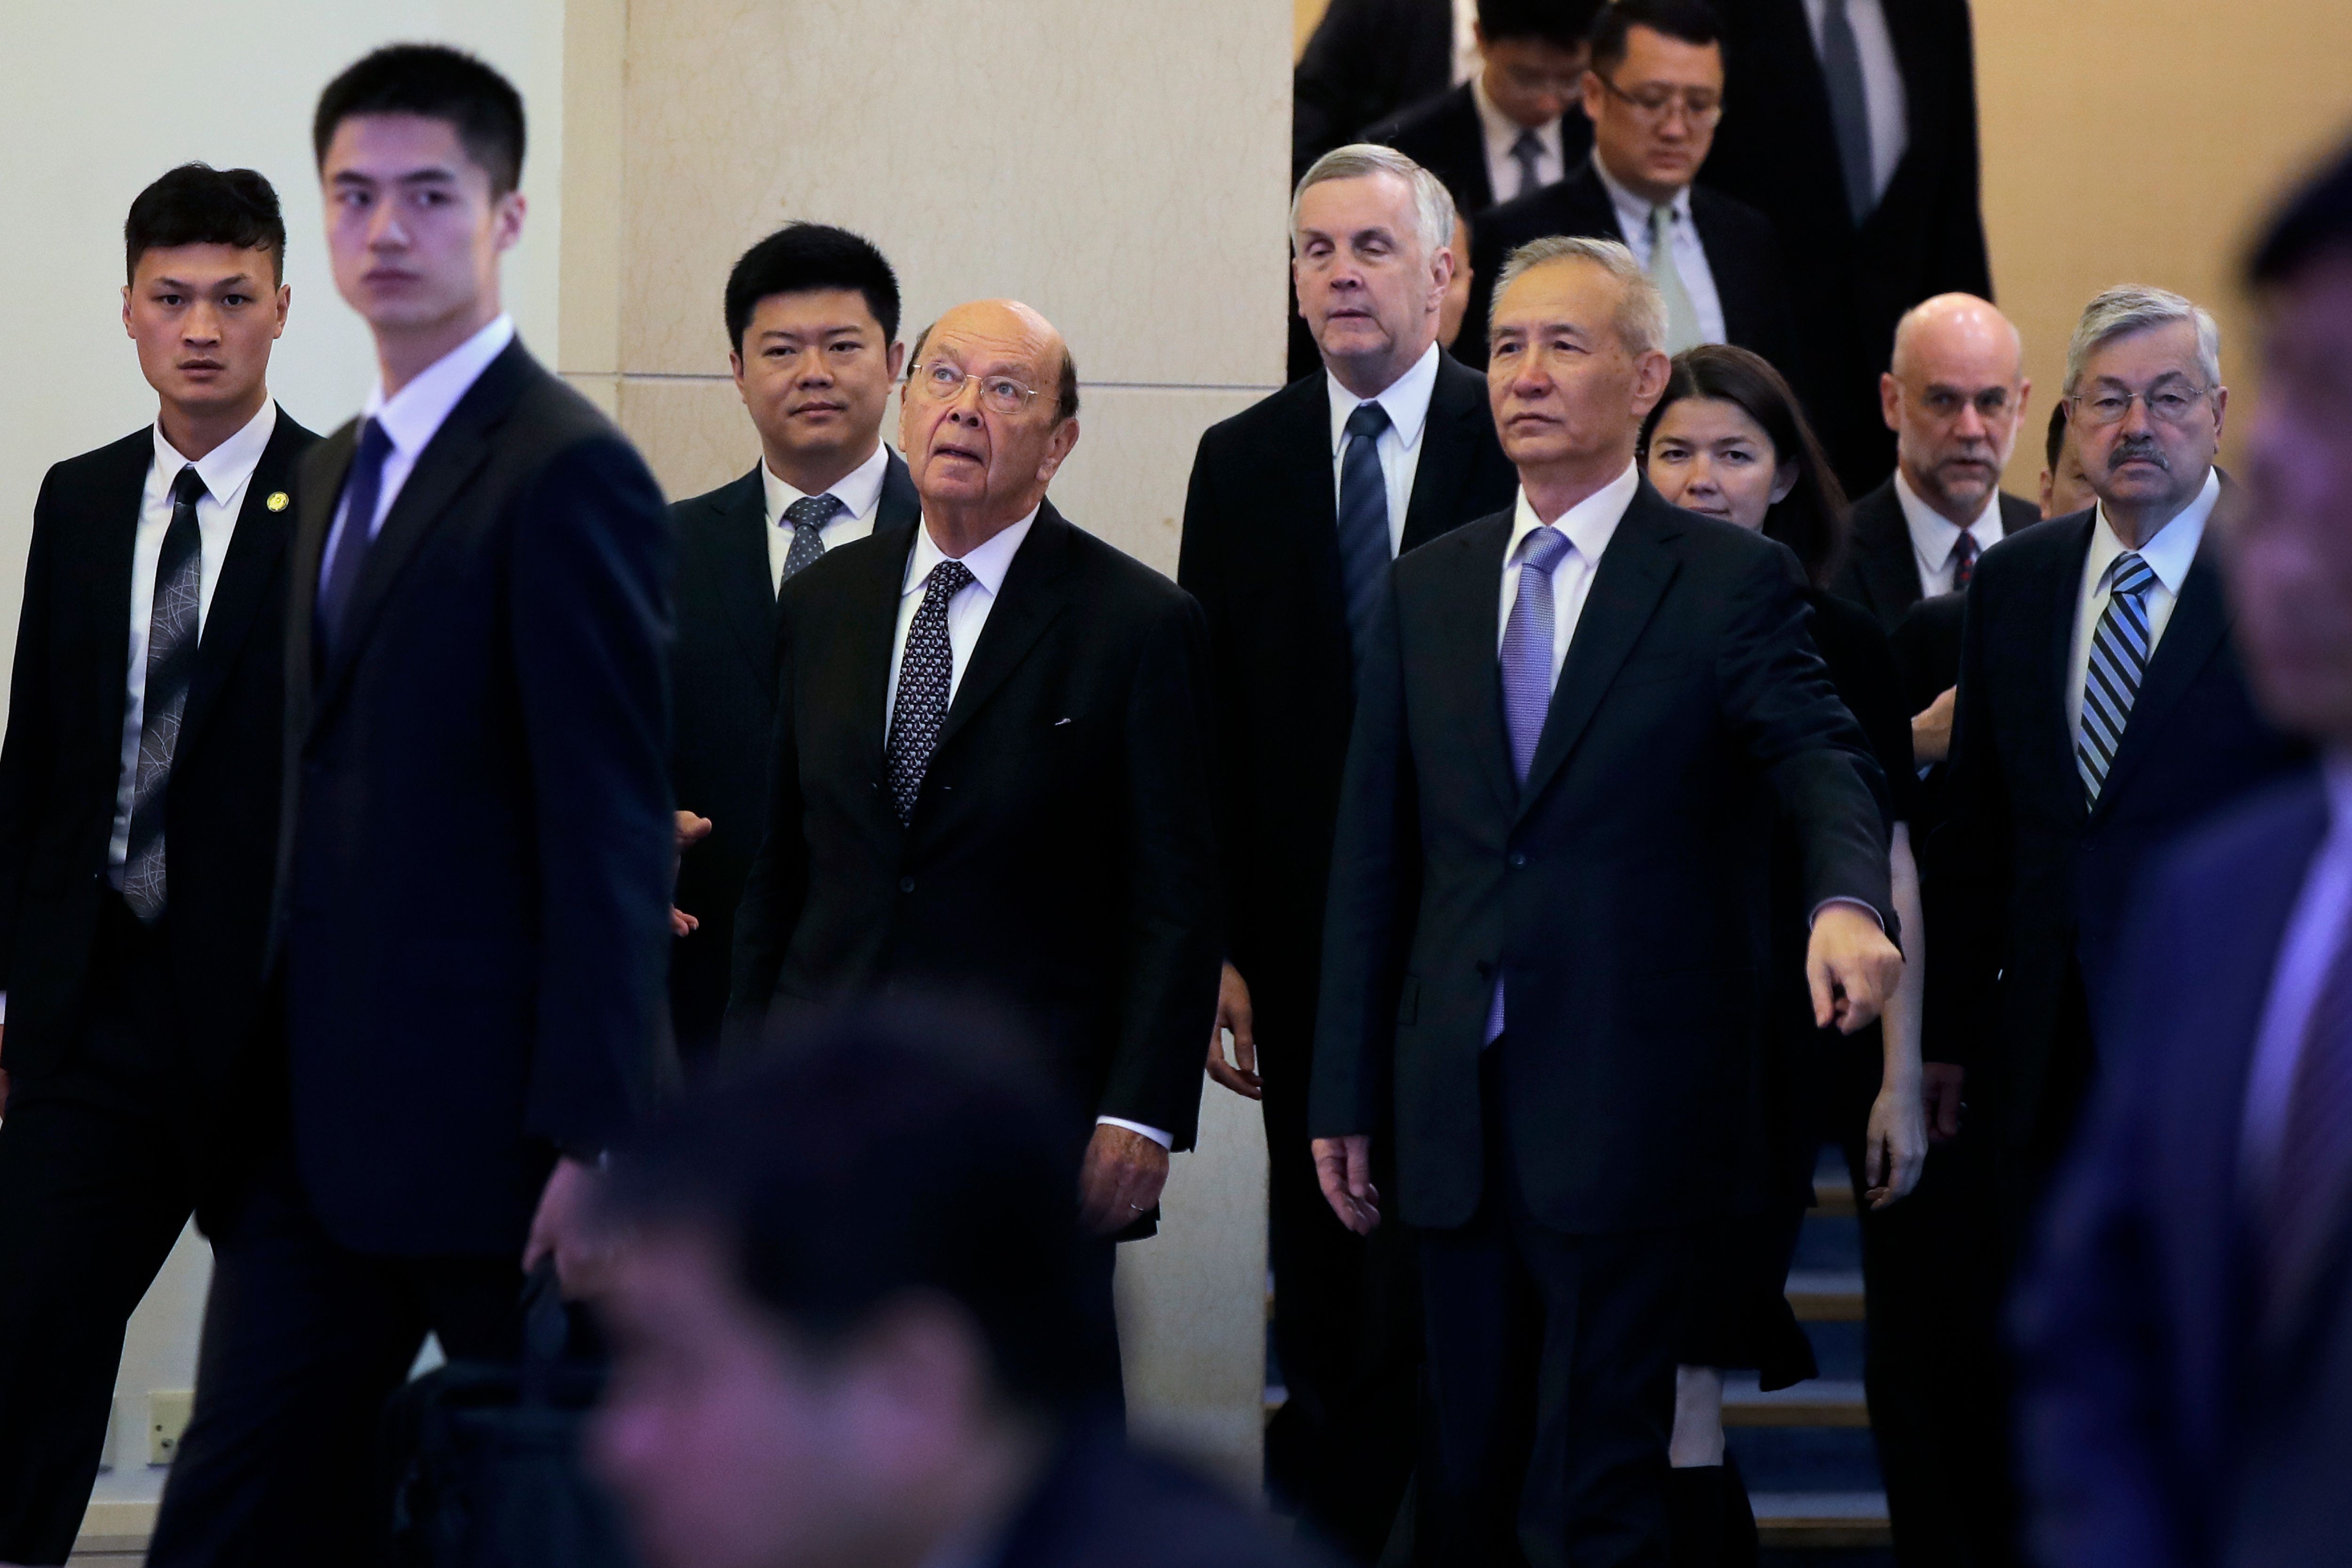 US Commerce Secretary Wilbur Ross (third from left) and Chinese Vice Premier Liu He arrive to attend a meeting at the Diaoyutai State Guesthouse in Beijing on Sunday. Photo: AFP